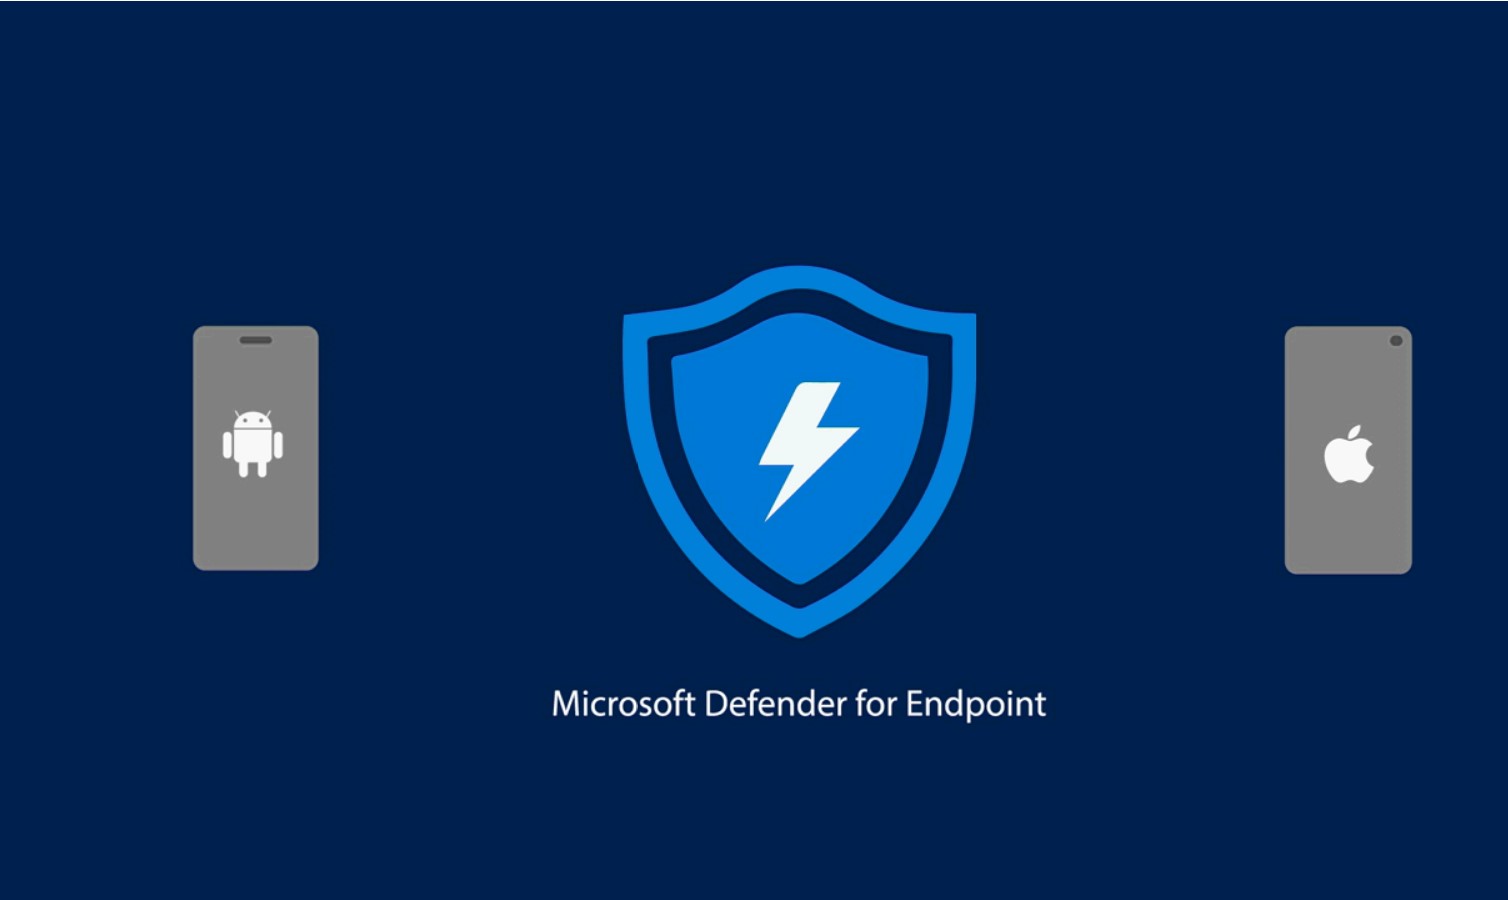 Configure Network Protection for Defender for Endpoint for Android and iOS Devices